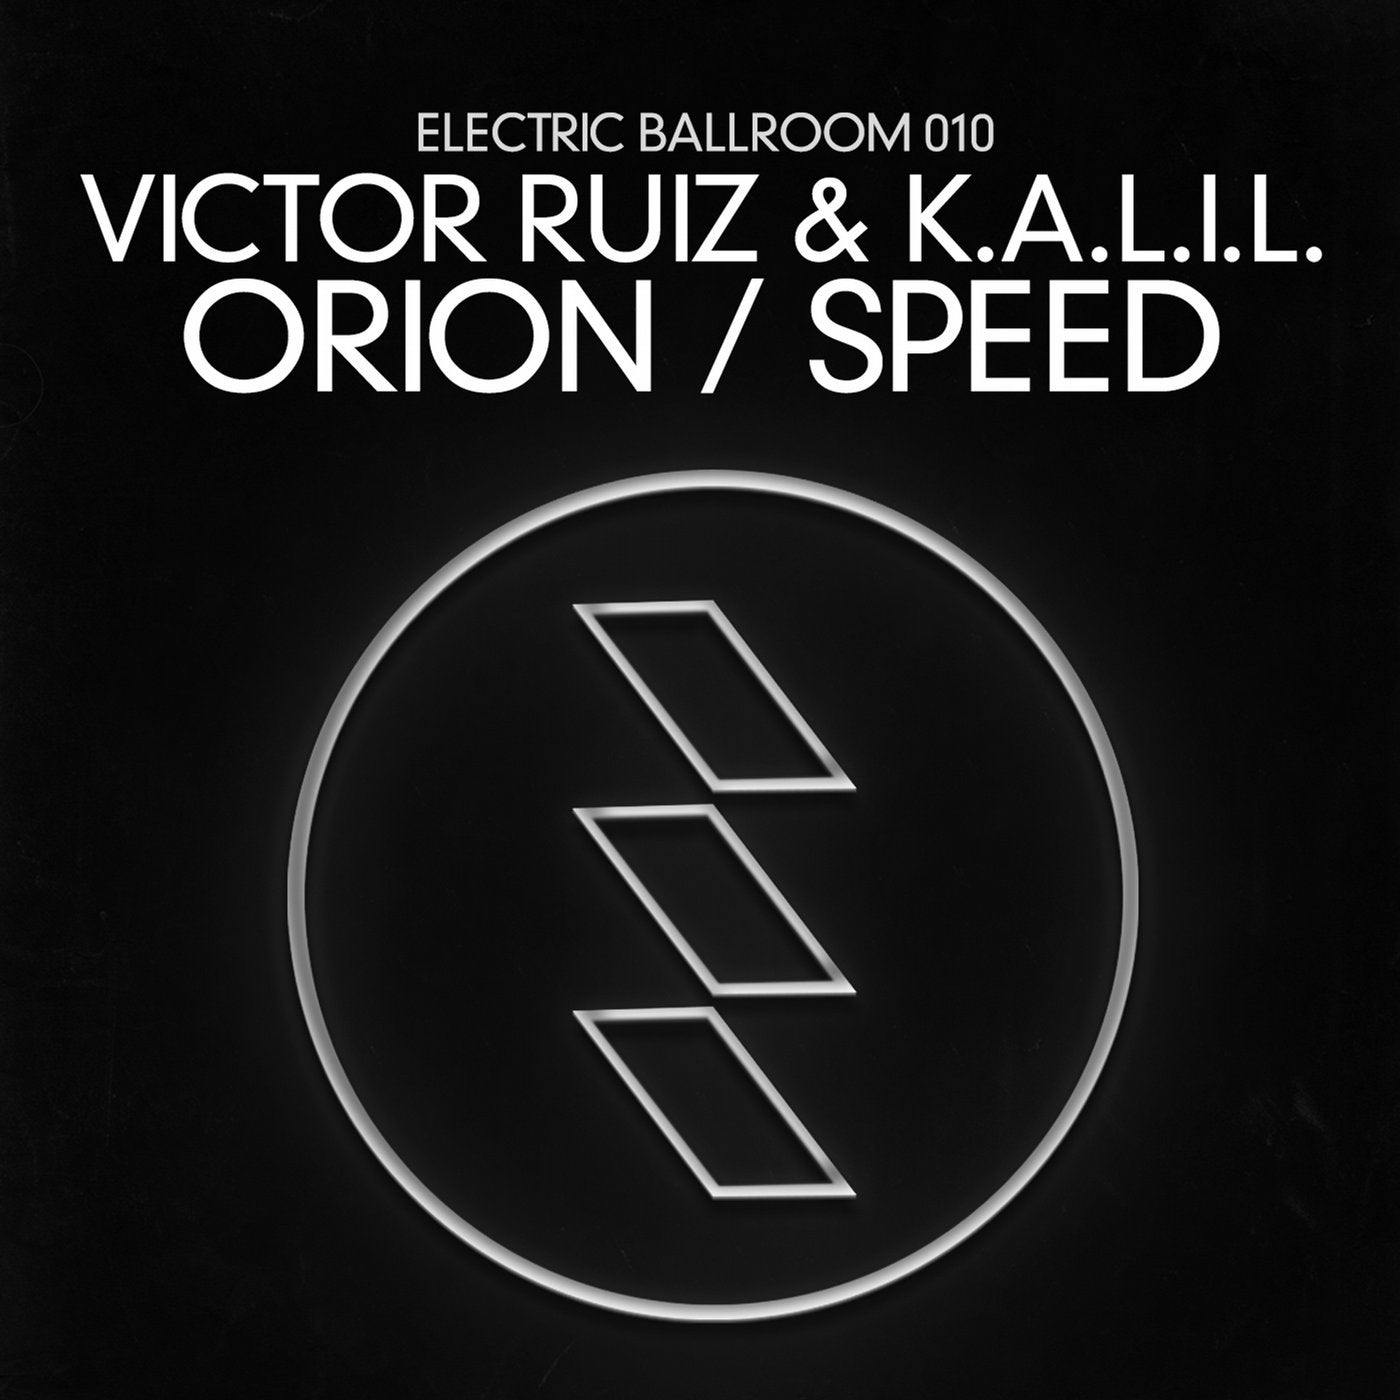 Orion/Speed